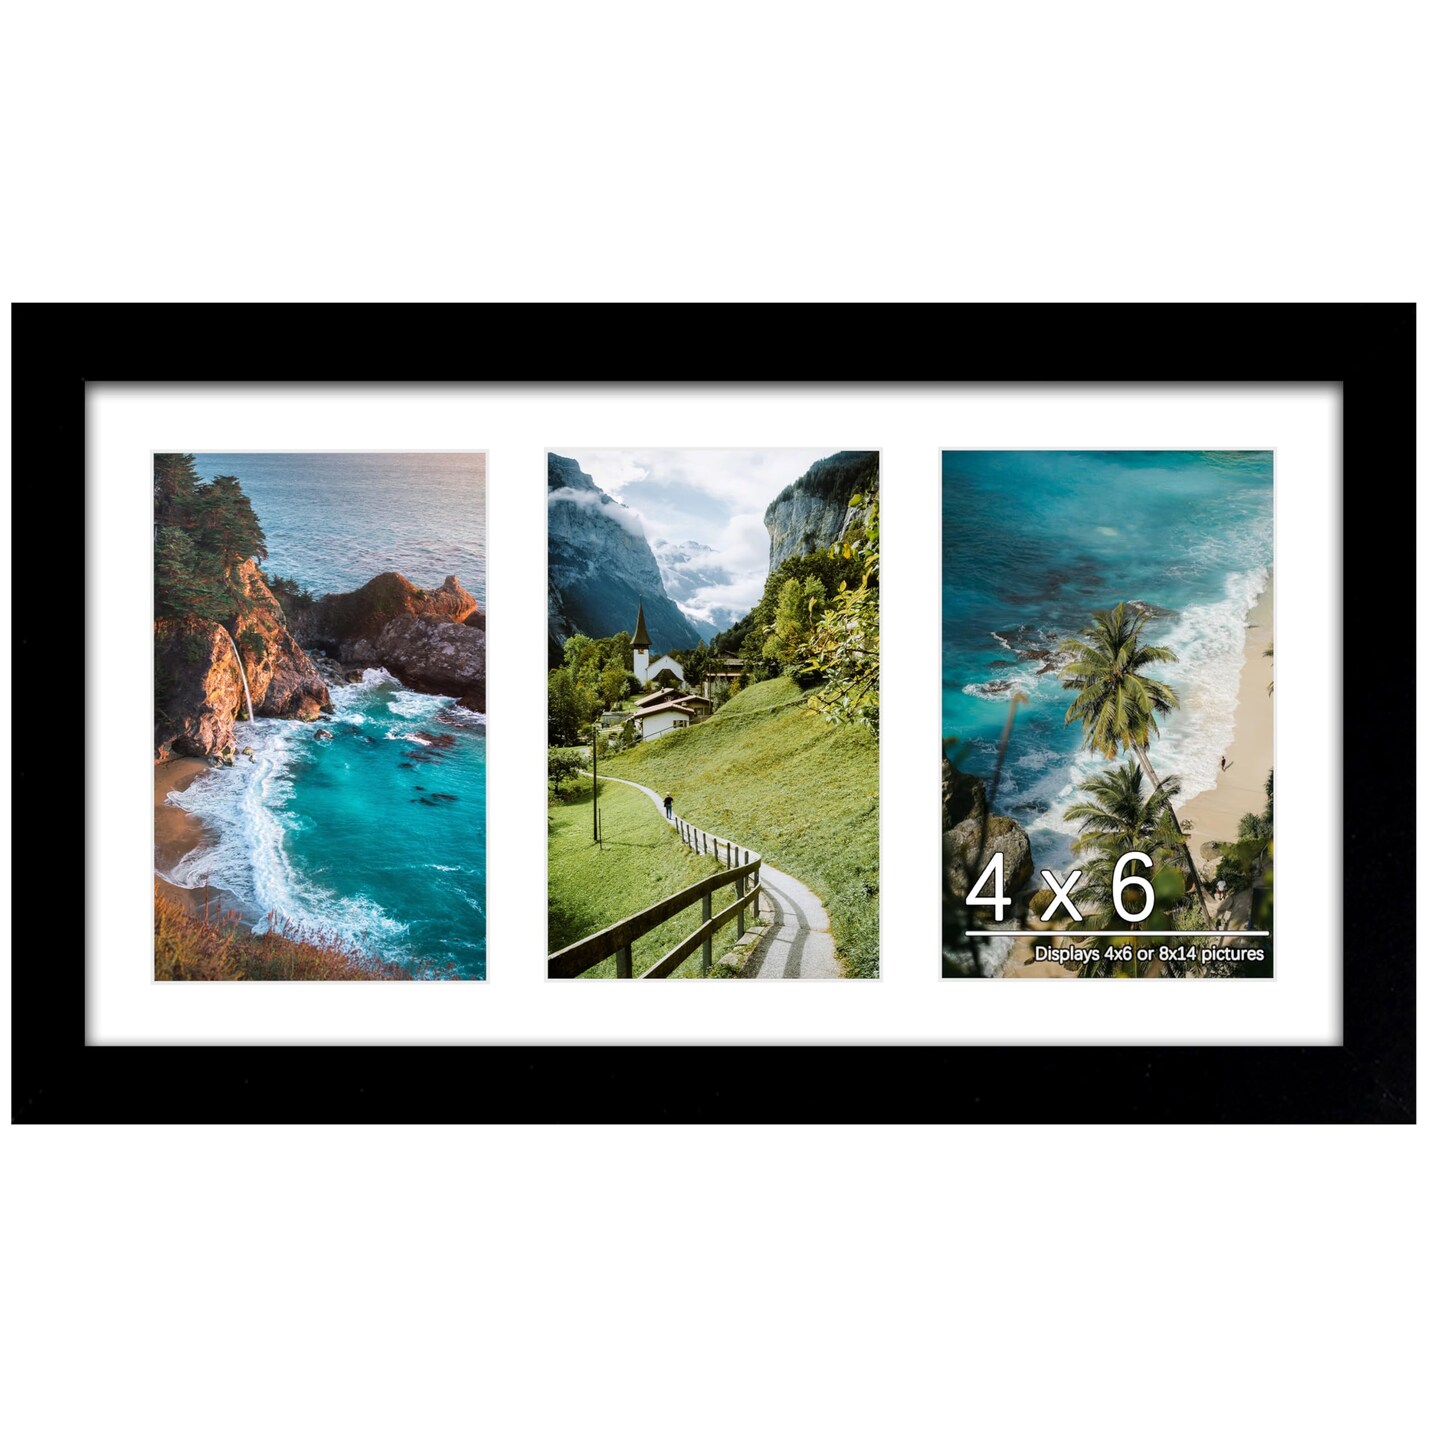 DUENPY 8x14 Collage Picture Frame, 4x6 Collage Picture Frame Displays Three 4x6 inch Photos, or 8x14 (Without Mat) for Available Horizontal Wall Mounting Display and Vertical, Black.